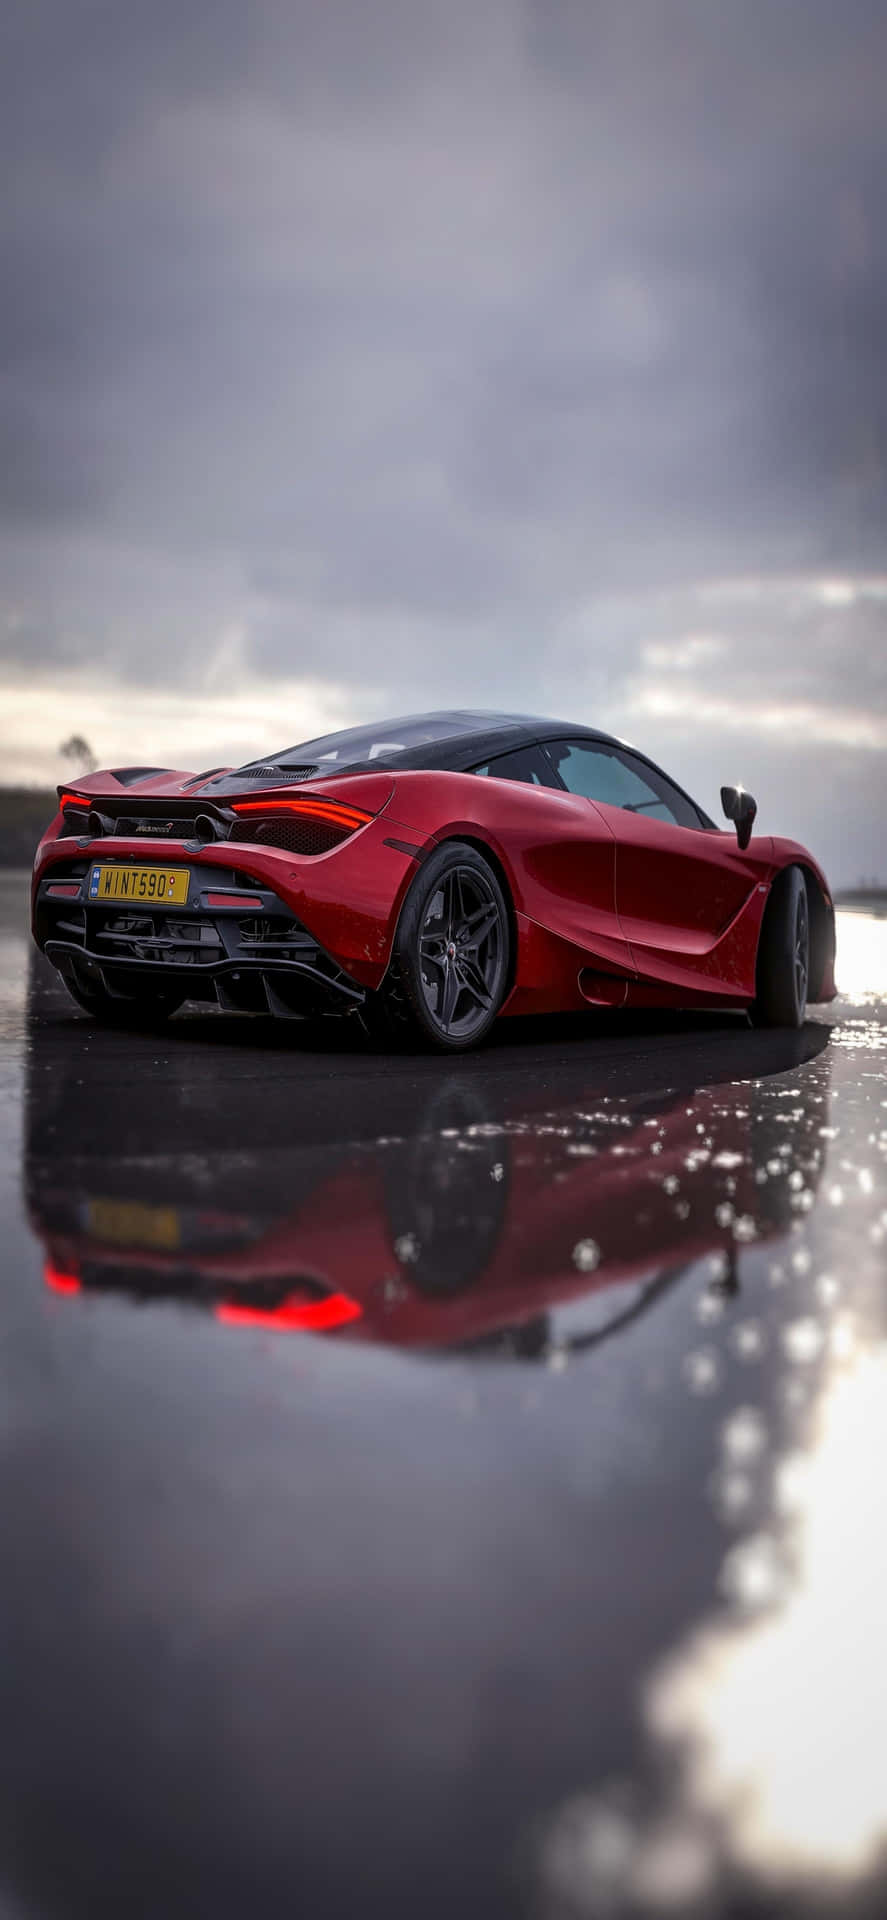 Experience the Speed and Luxury of the Iphone Xs Mclaren 720s